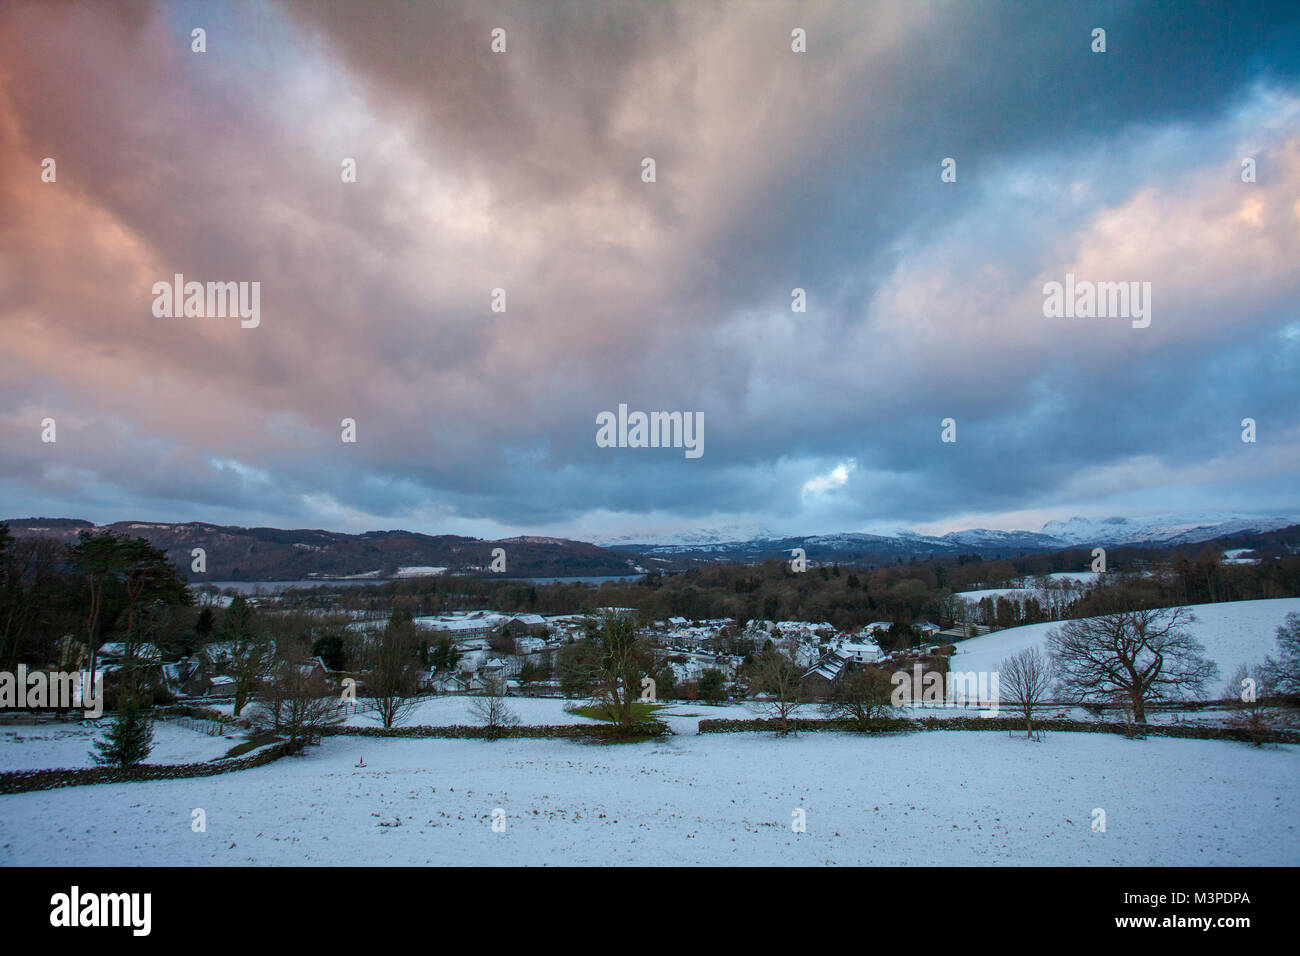 A winter sunrise over the village of Troutbeck Bridge on the banks of Lake Windermere, Cumbria, England, Uk Stock Photo